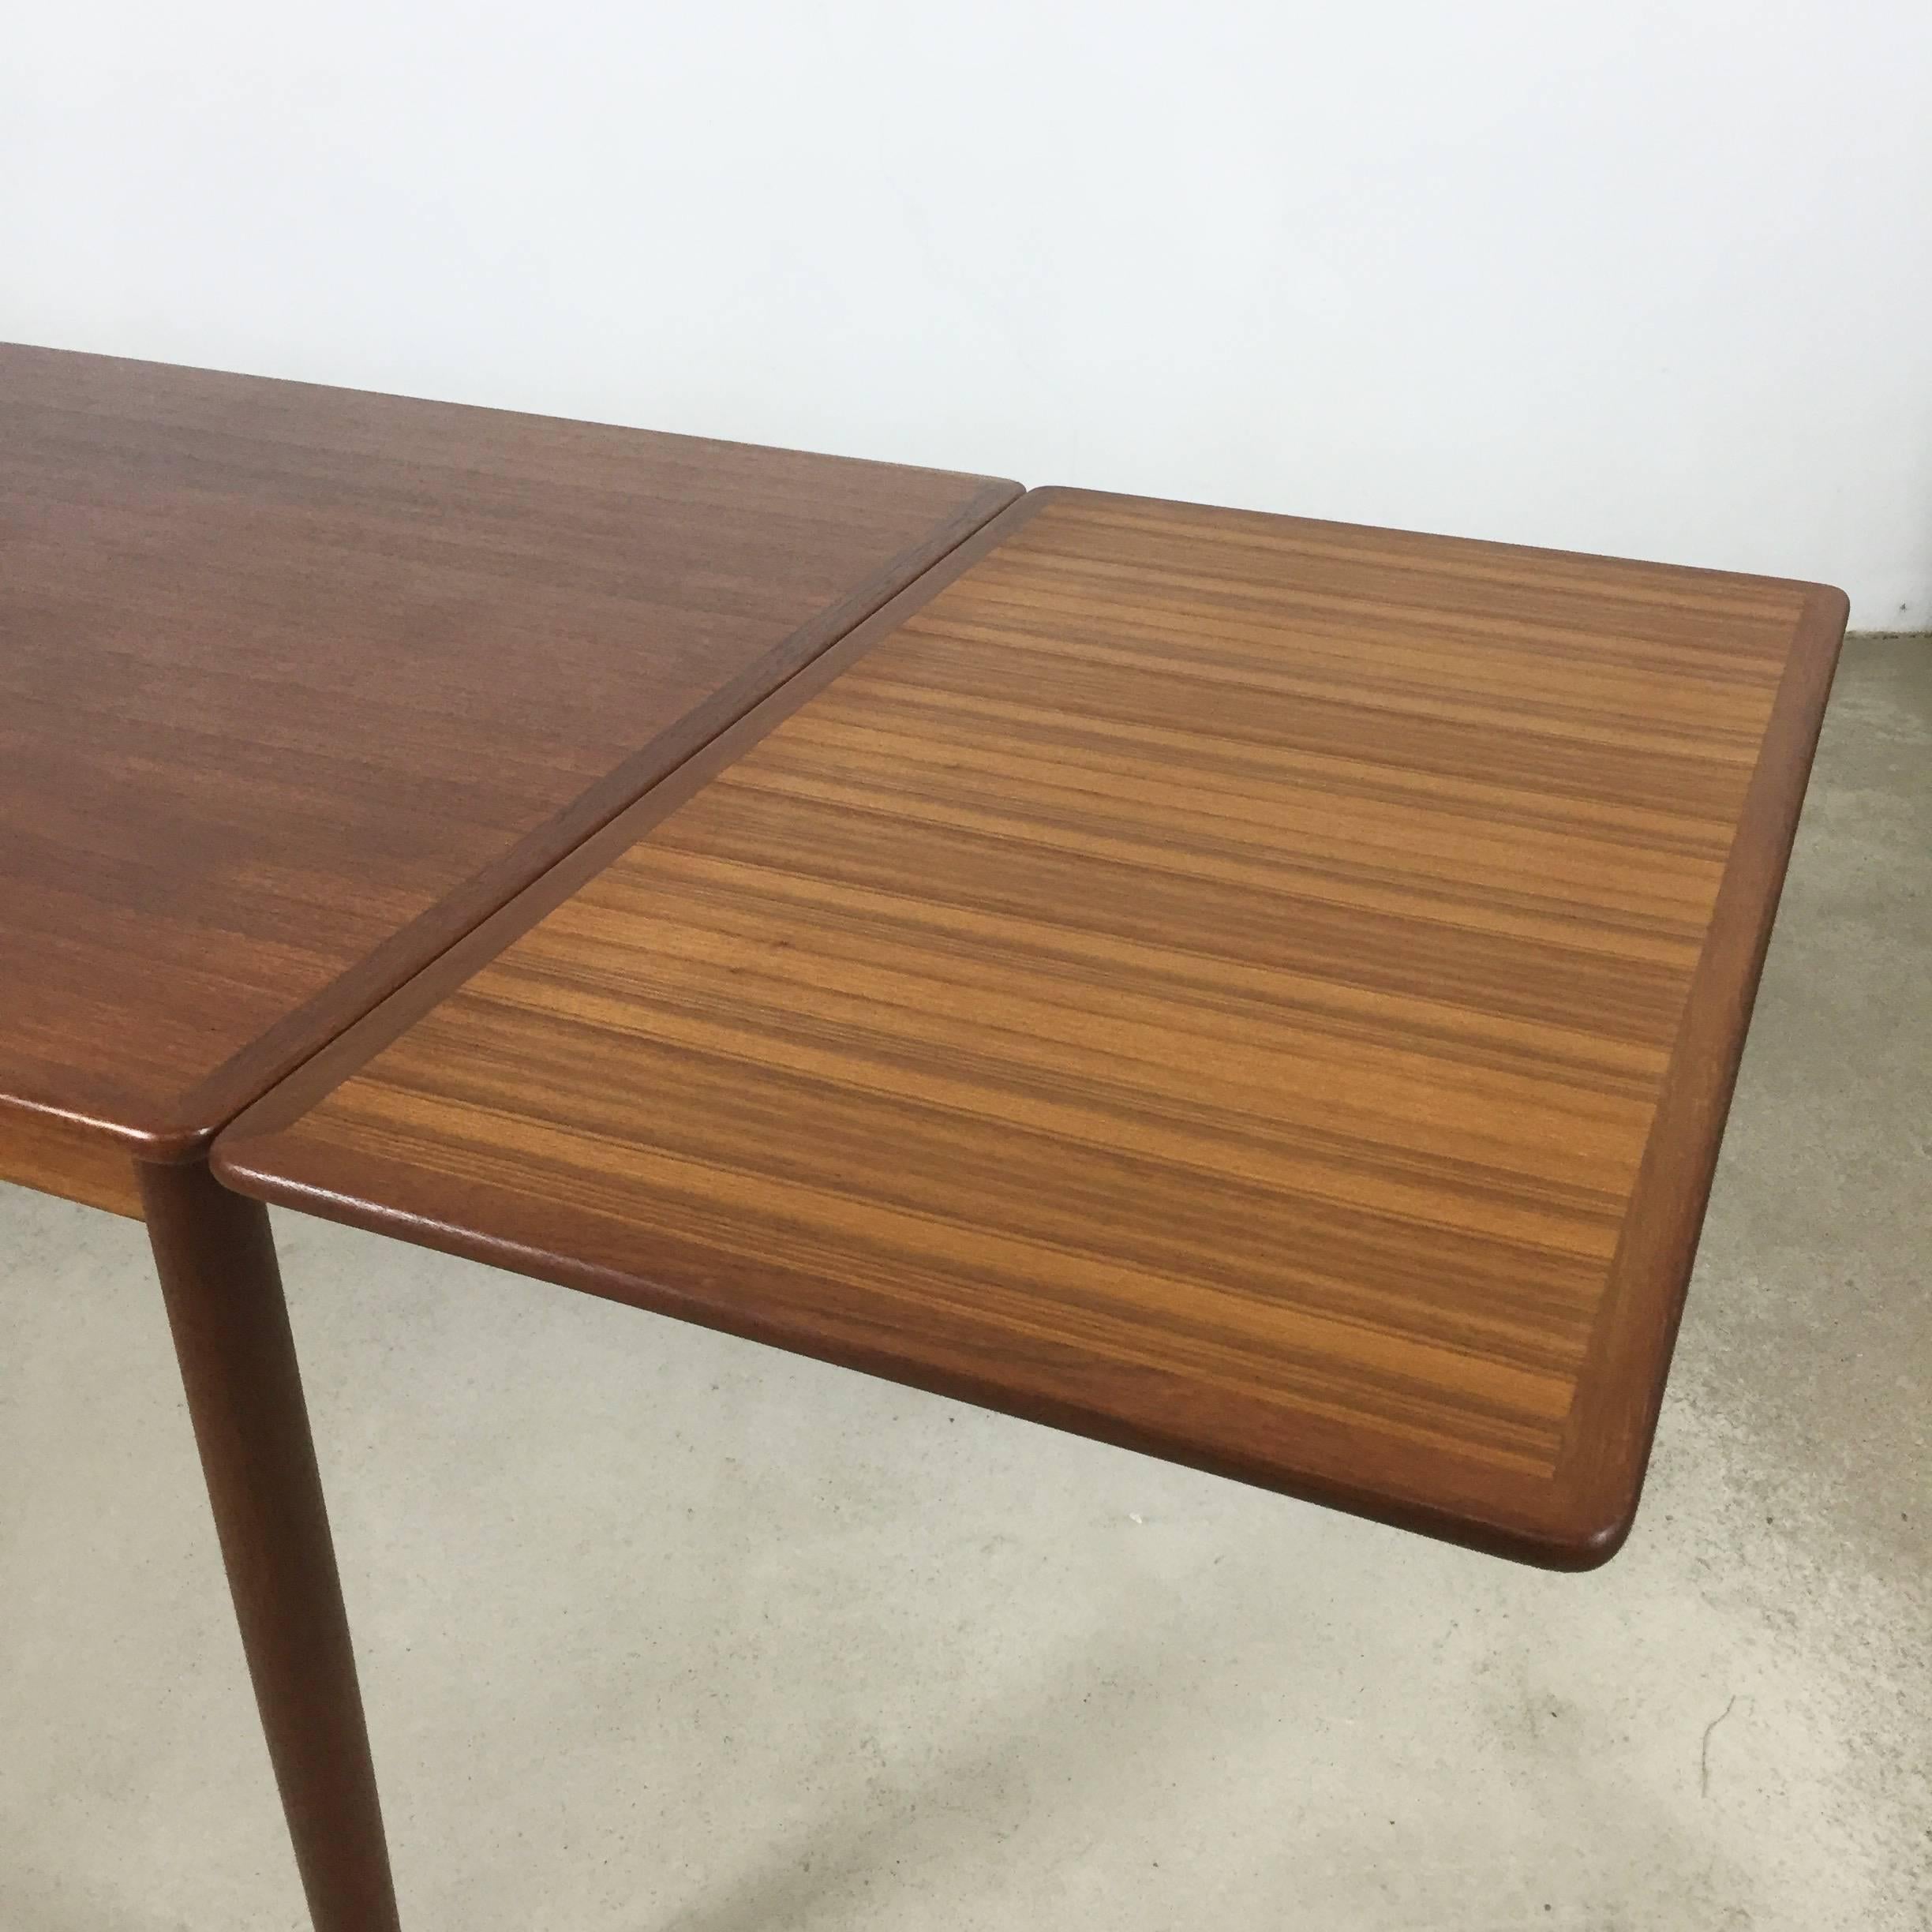 Teak Dining Table Willy Sigh for H. Sigh and Sons Mobelfabrik, 1960s, Denmark For Sale 2